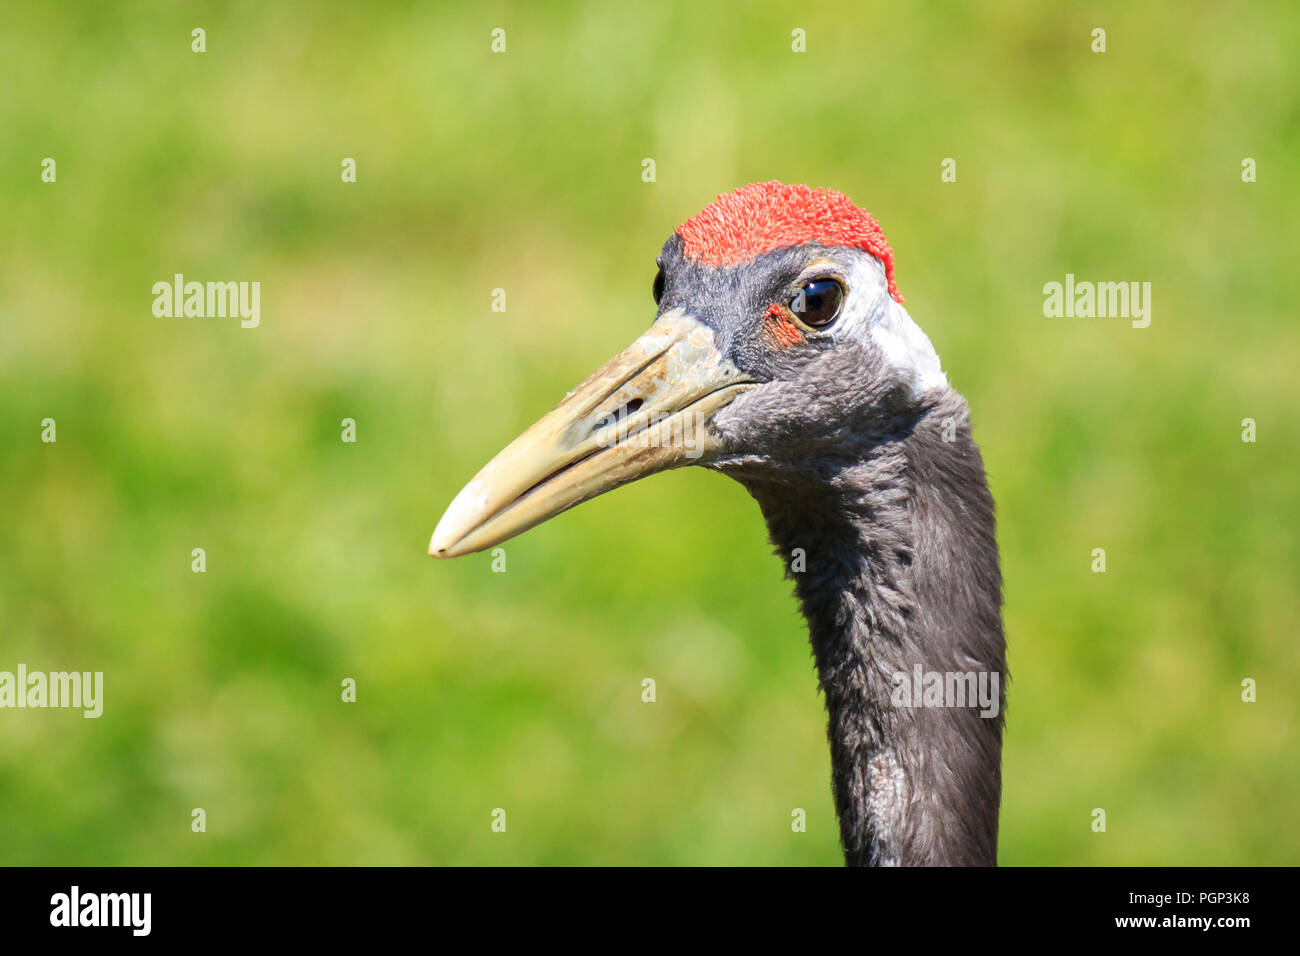 Closeup of a red-crowned crane (Grus japonensis) alias Manchurian crane or Japanese crane bird foraging in water and a grass meadow on  sunny day. Stock Photo